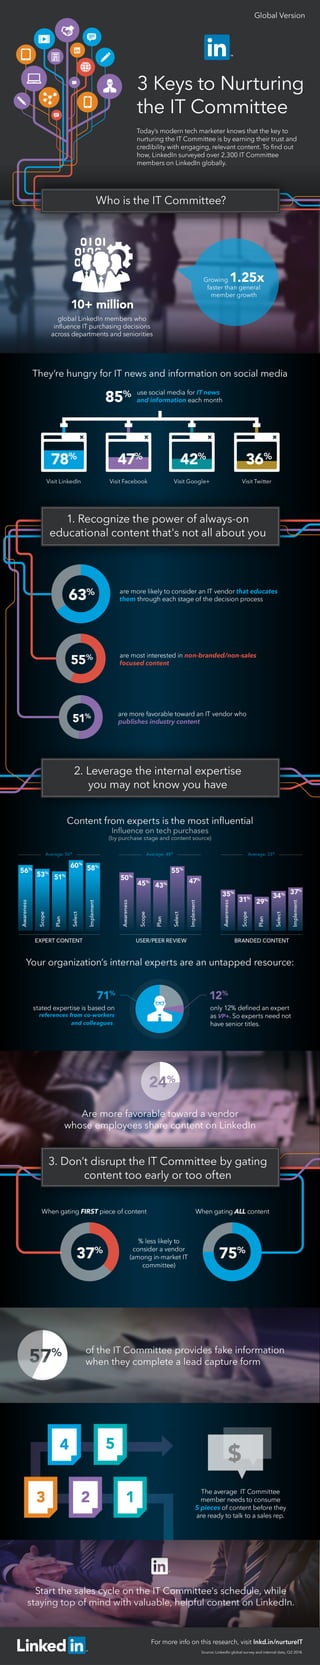 Nurturing the IT Committee Lead - INFOGRAPHIC